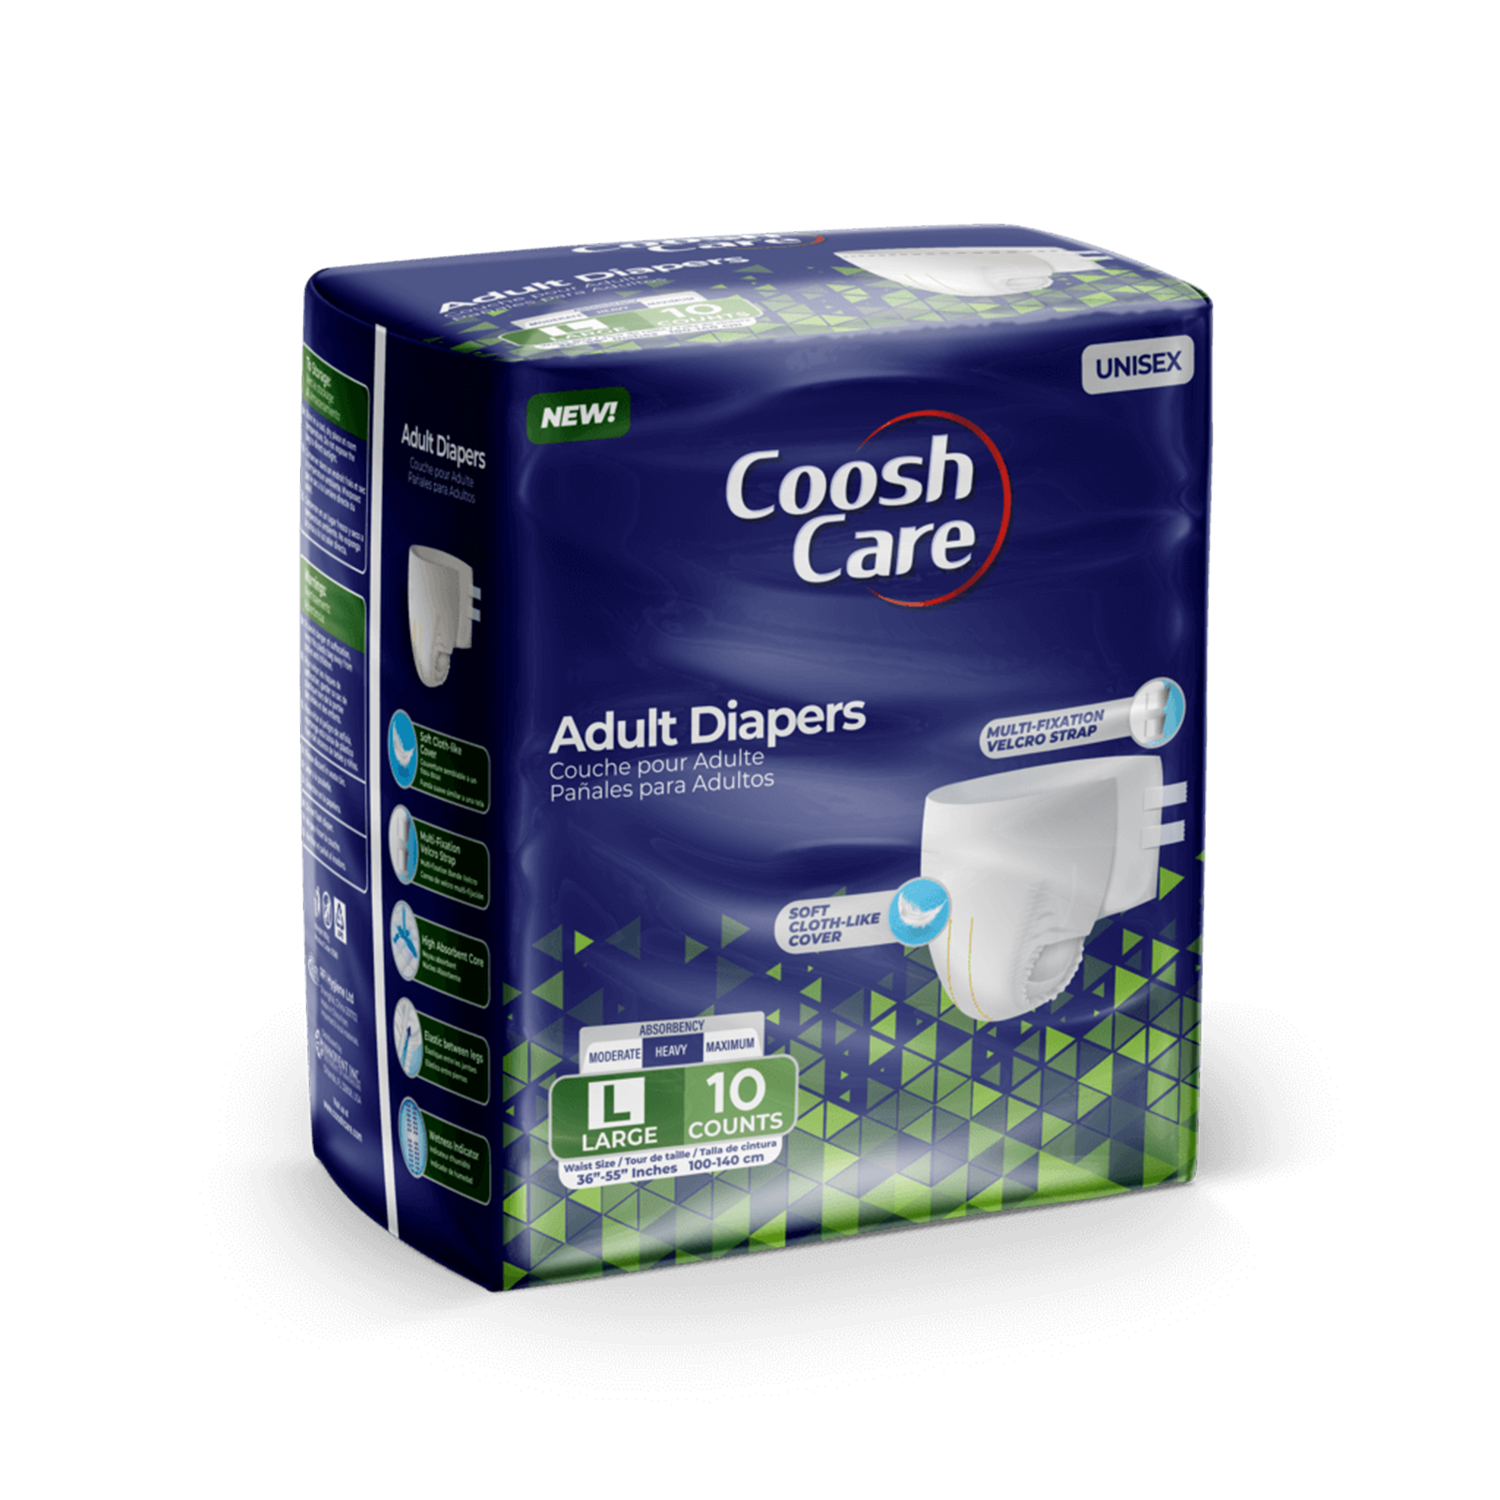 Cooshcare Adult Diapers